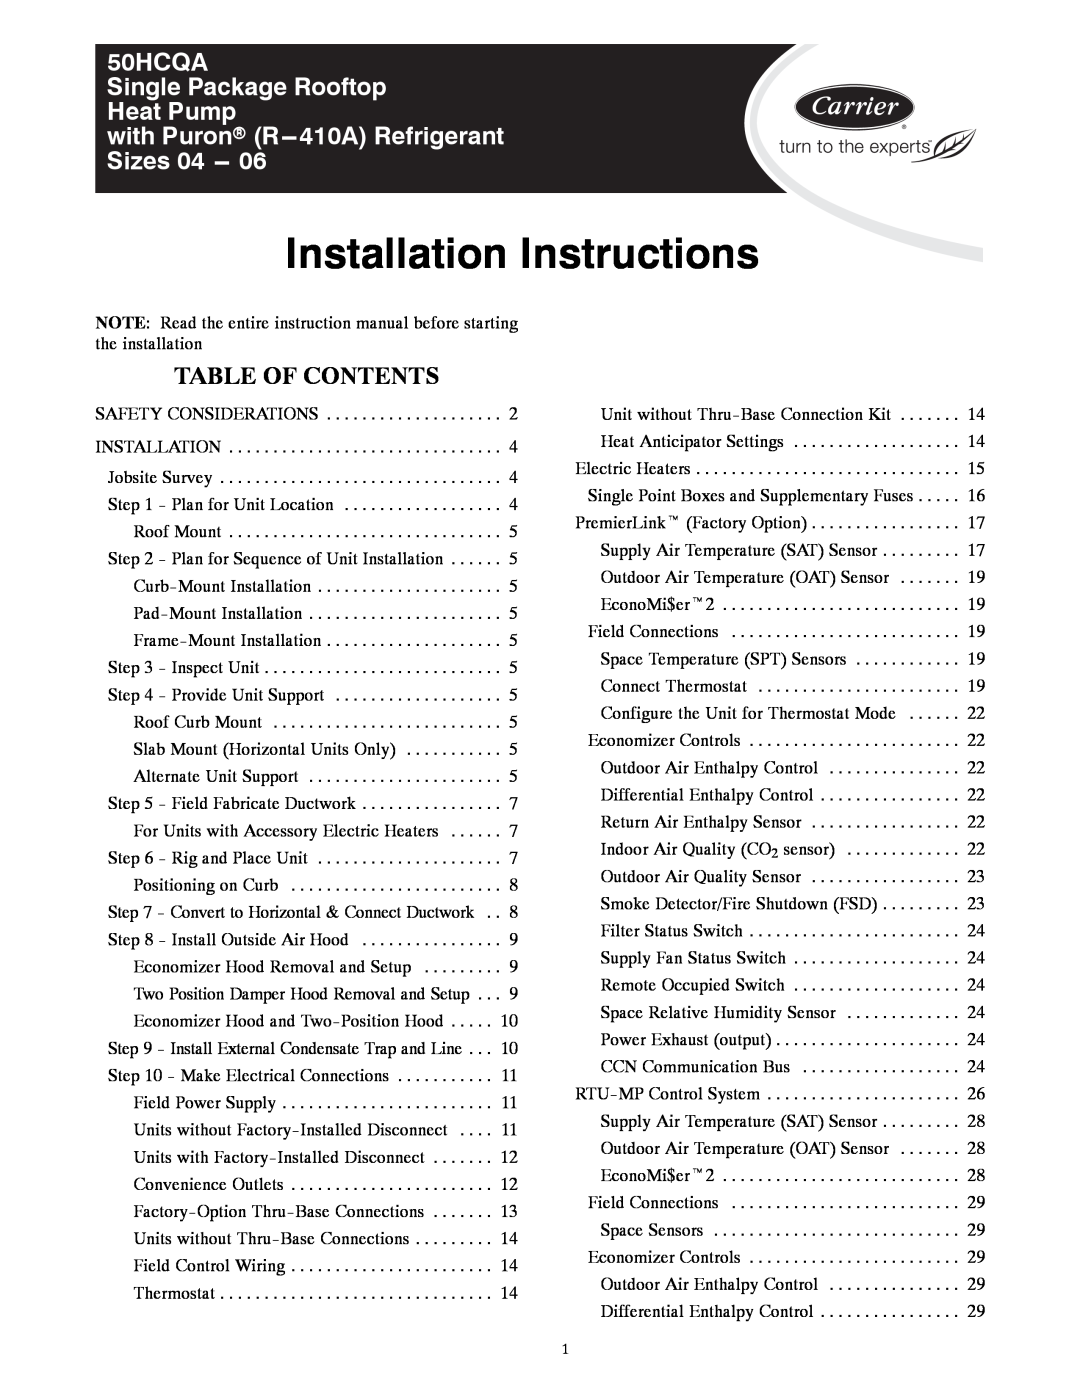 Carrier 50HCQA installation instructions Table Of Contents, Installation Instructions 